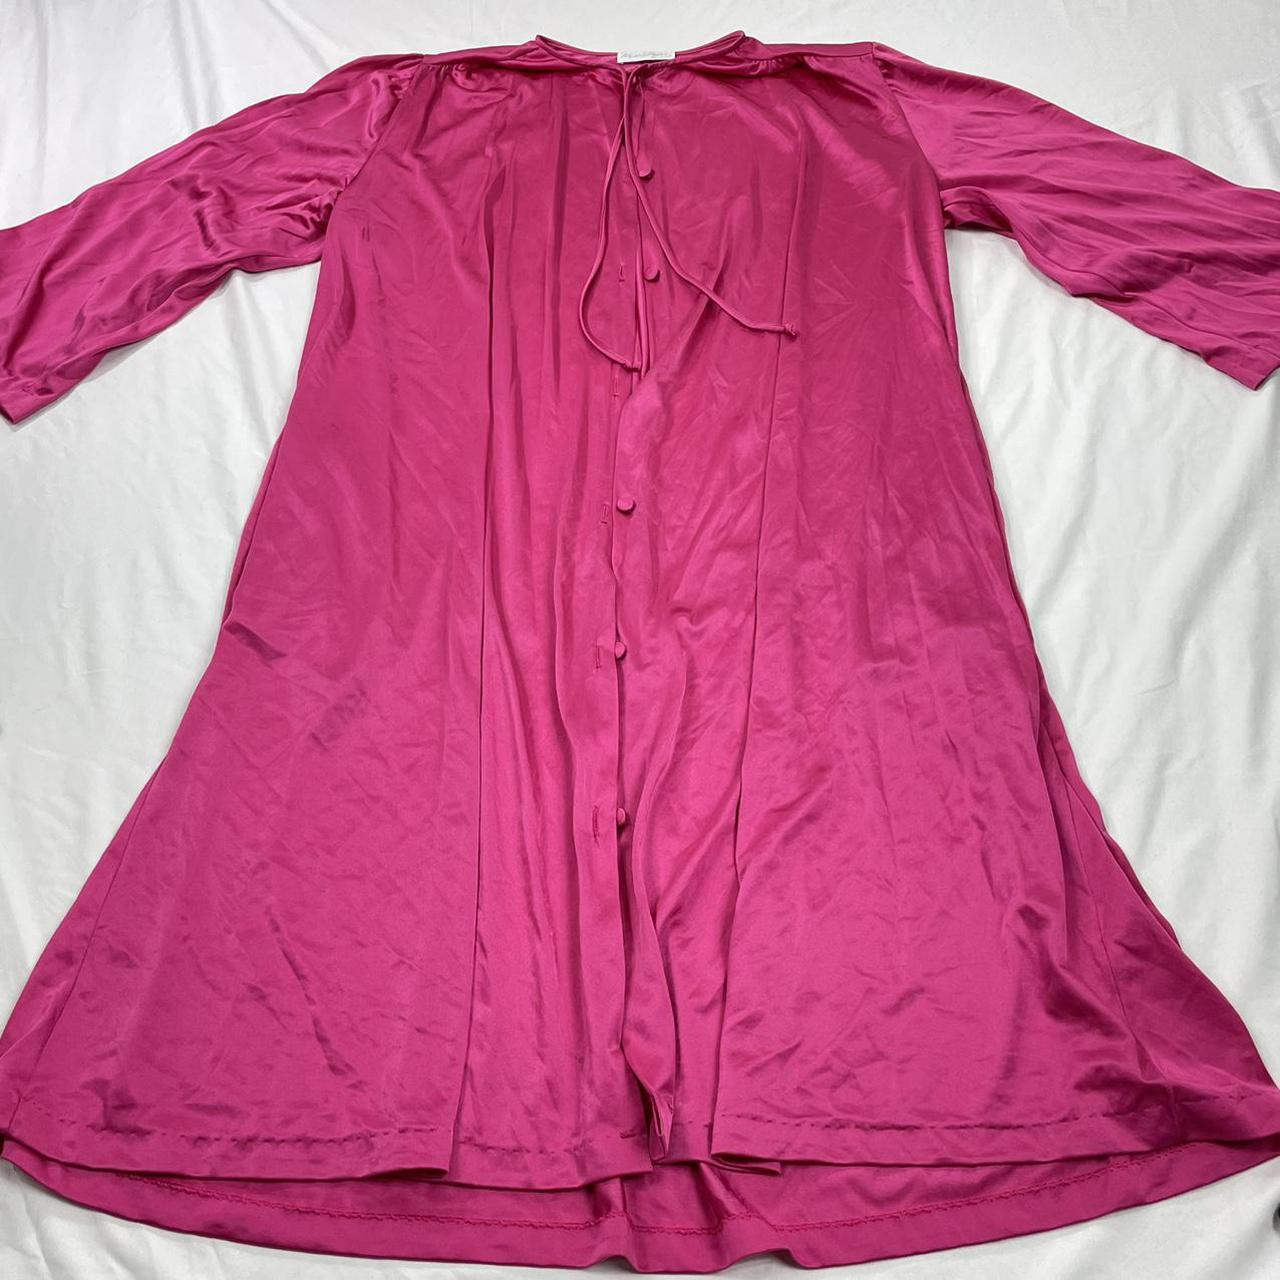 Product Image 2 - vintage silky robe

light and flowy,